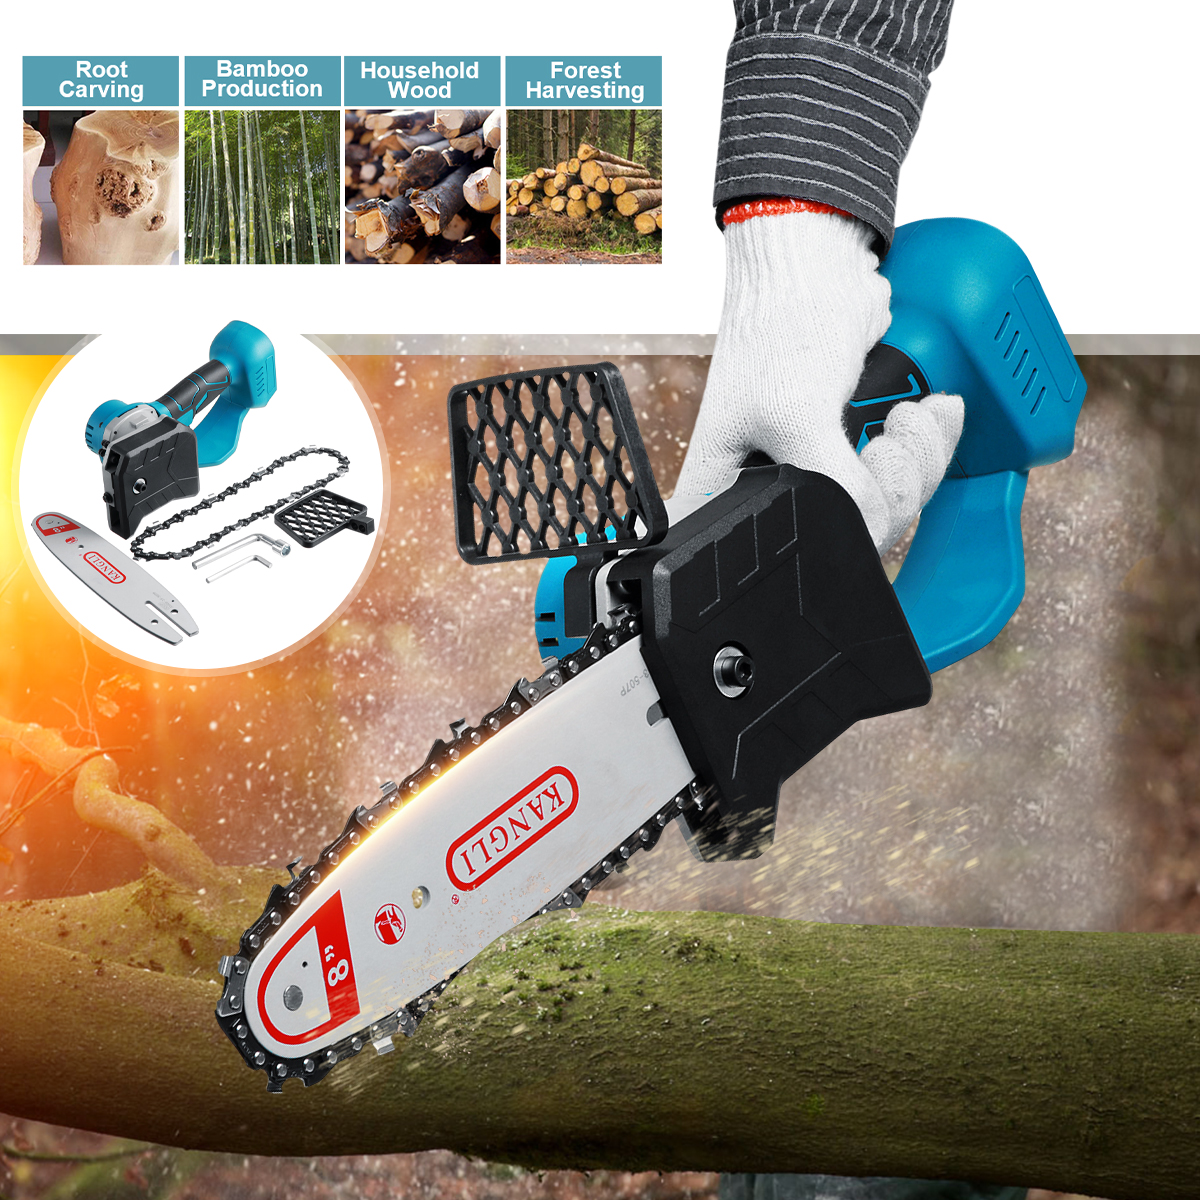 8-Inch-Electric-Chain-Saw-Cordless-Woodworking-Chainsaw-Power-Tool-Fit-For-Makita-18V21V-Battery-1804676-9